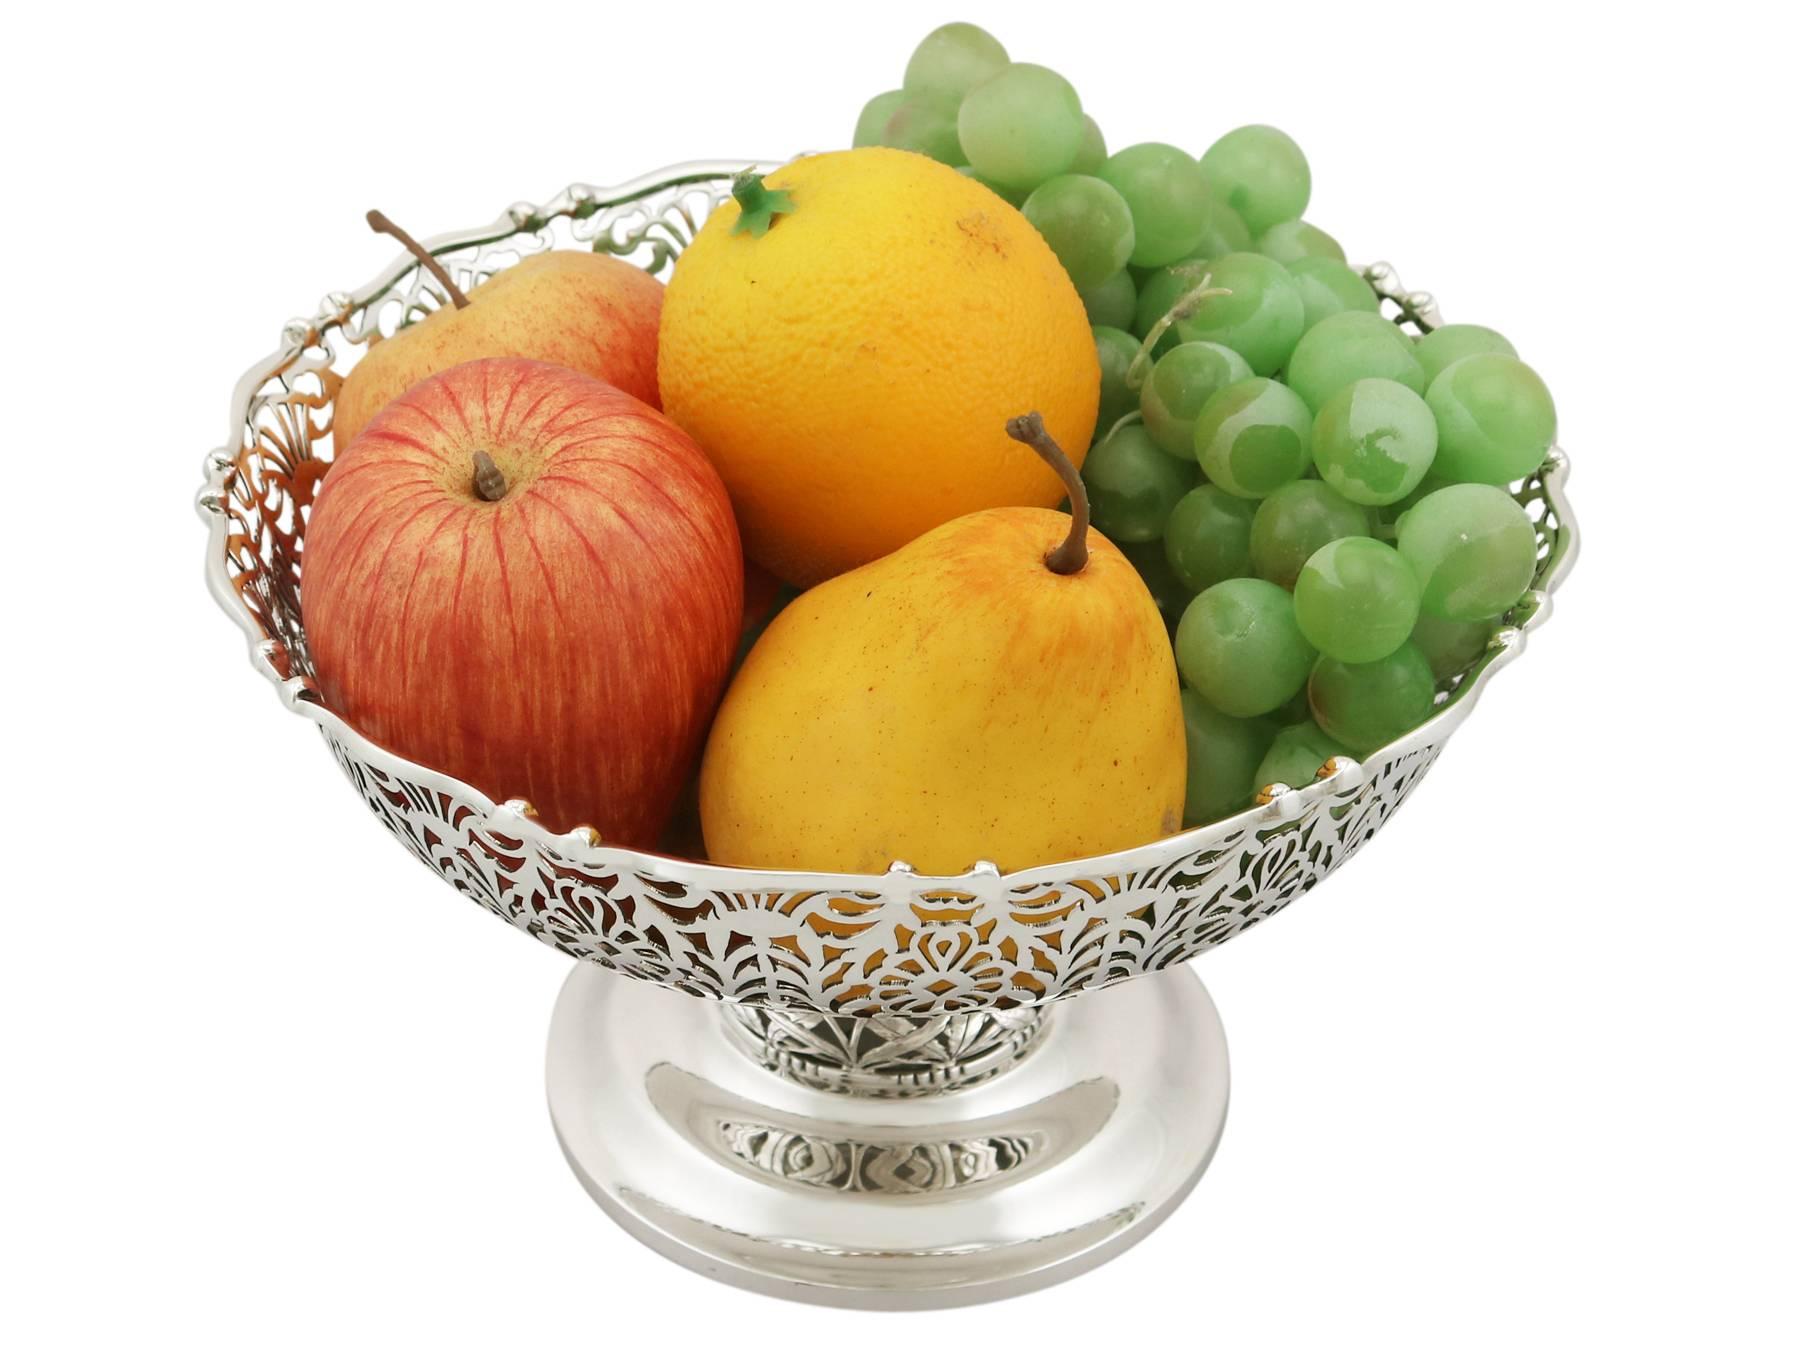 An exceptional, fine and impressive antique George V English sterling silver centrepiece / fruit bowl; an addition to our ornamental silverware collection

This exceptional antique sterling silver fruit bowl has a circular rounded form onto a